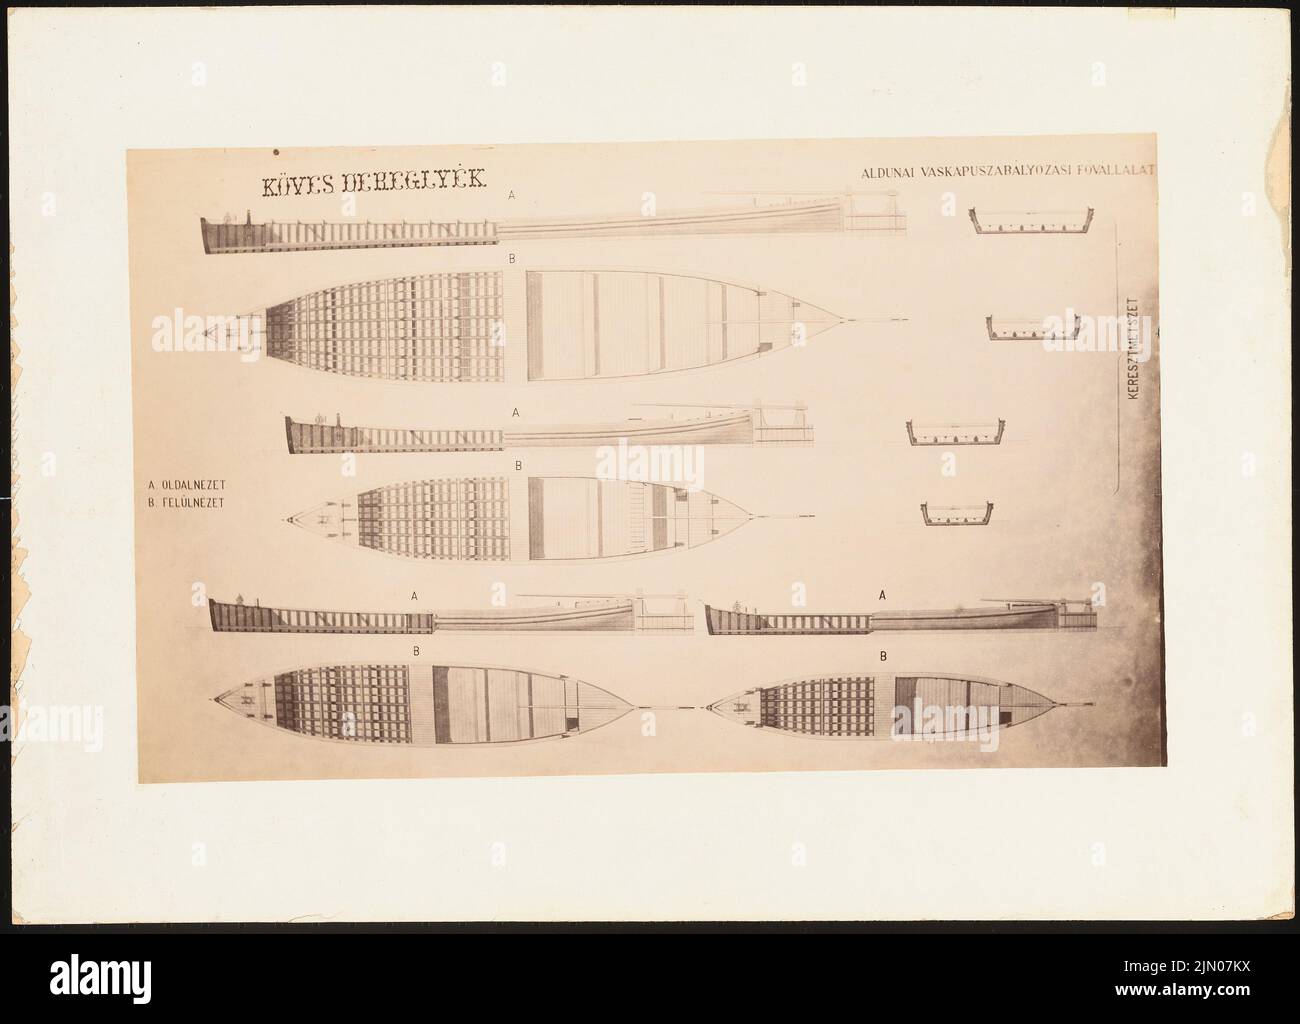 G. Luther Maschinenfabrik (company), ship designs (without date): cross -sections and views. Photo on cardboard, 35.5 x 49.4 cm (including scan edges) G. Luther Maschinenfabrik (Firma) : Schiffsentwürfe Stock Photo